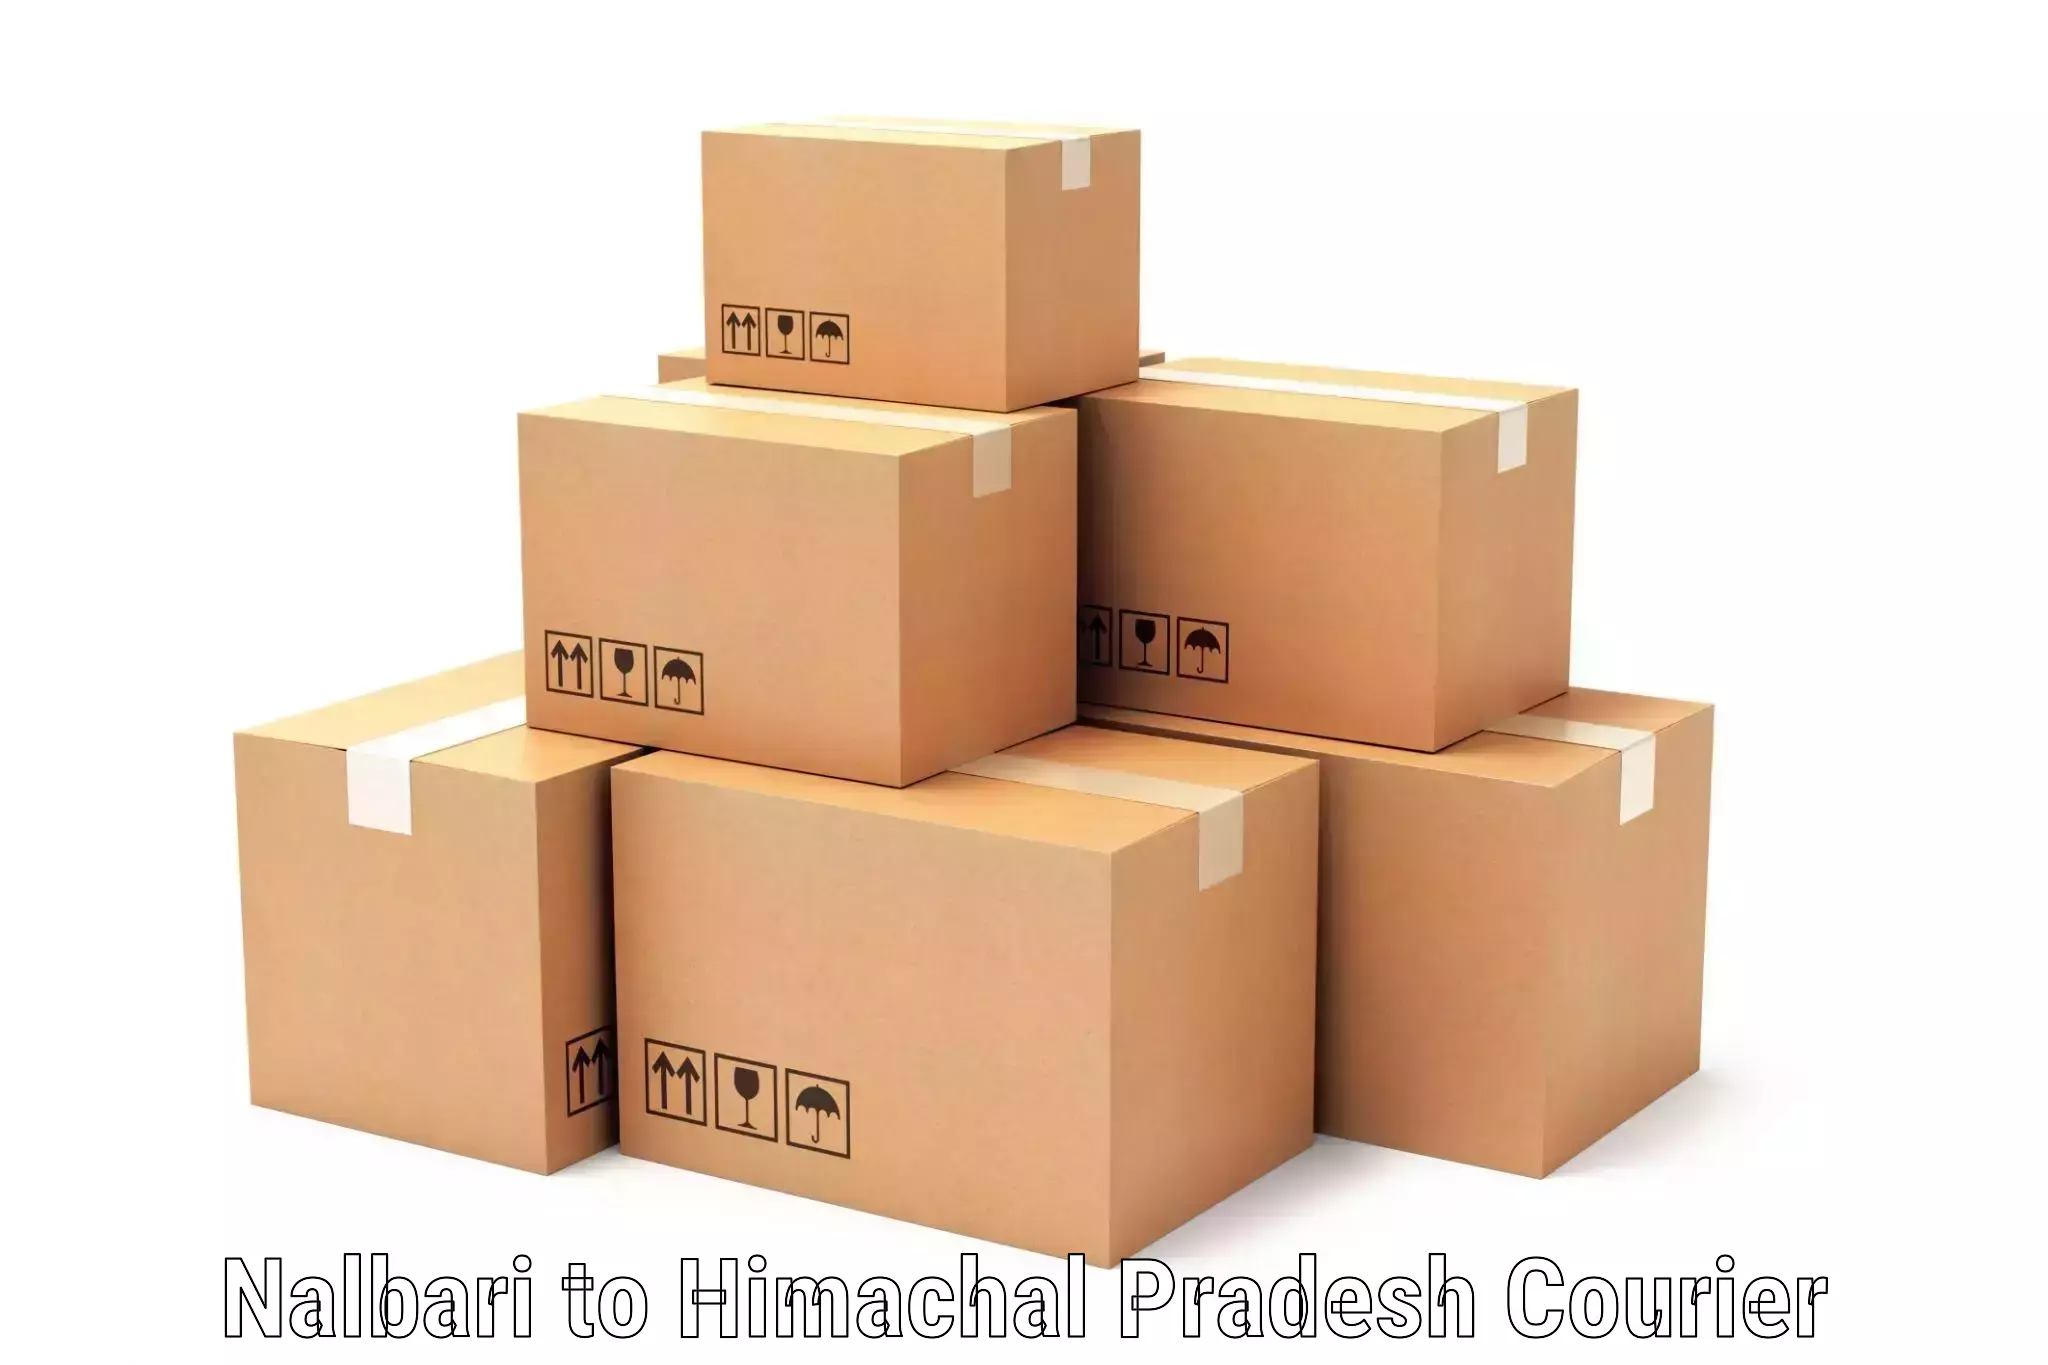 Cost-effective courier options Nalbari to Banjar